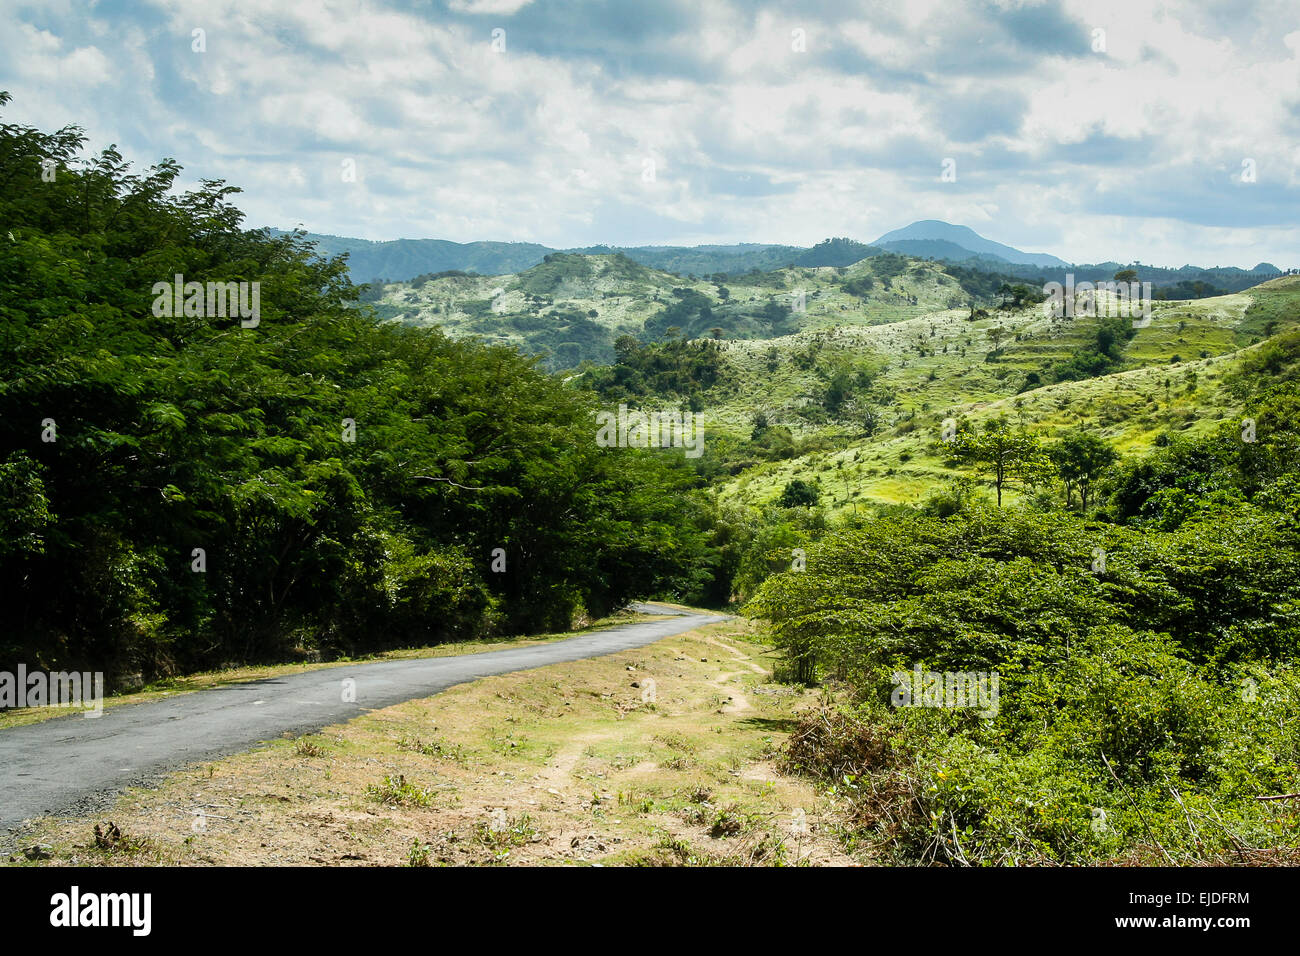 Lombok, Indonesia. Hills and narrow track winding through Indonesian countryside. Stock Photo